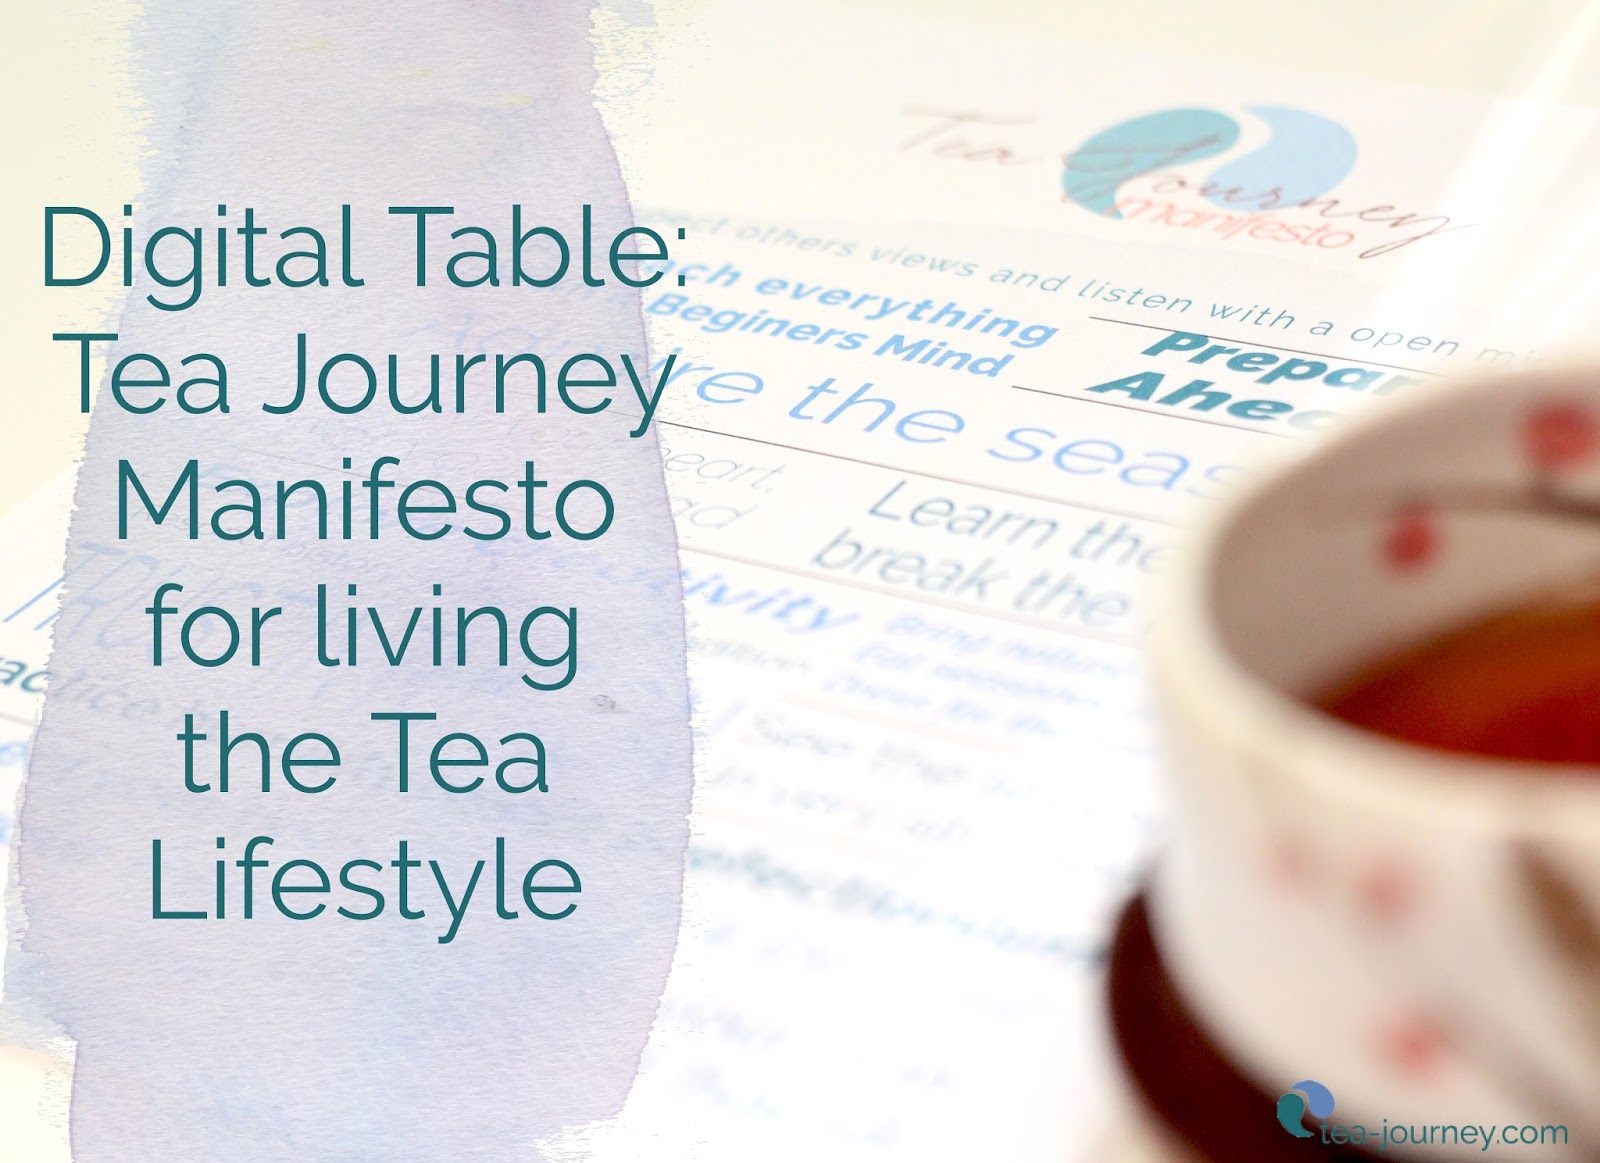 In this modern age we are in need of a Tea Journey Manifesto to guide our practice with tea and its lifestyle. Digital Table is about community and everyone coming together for a common cause through tea and the cultures, traditions and history that surrounds it. 